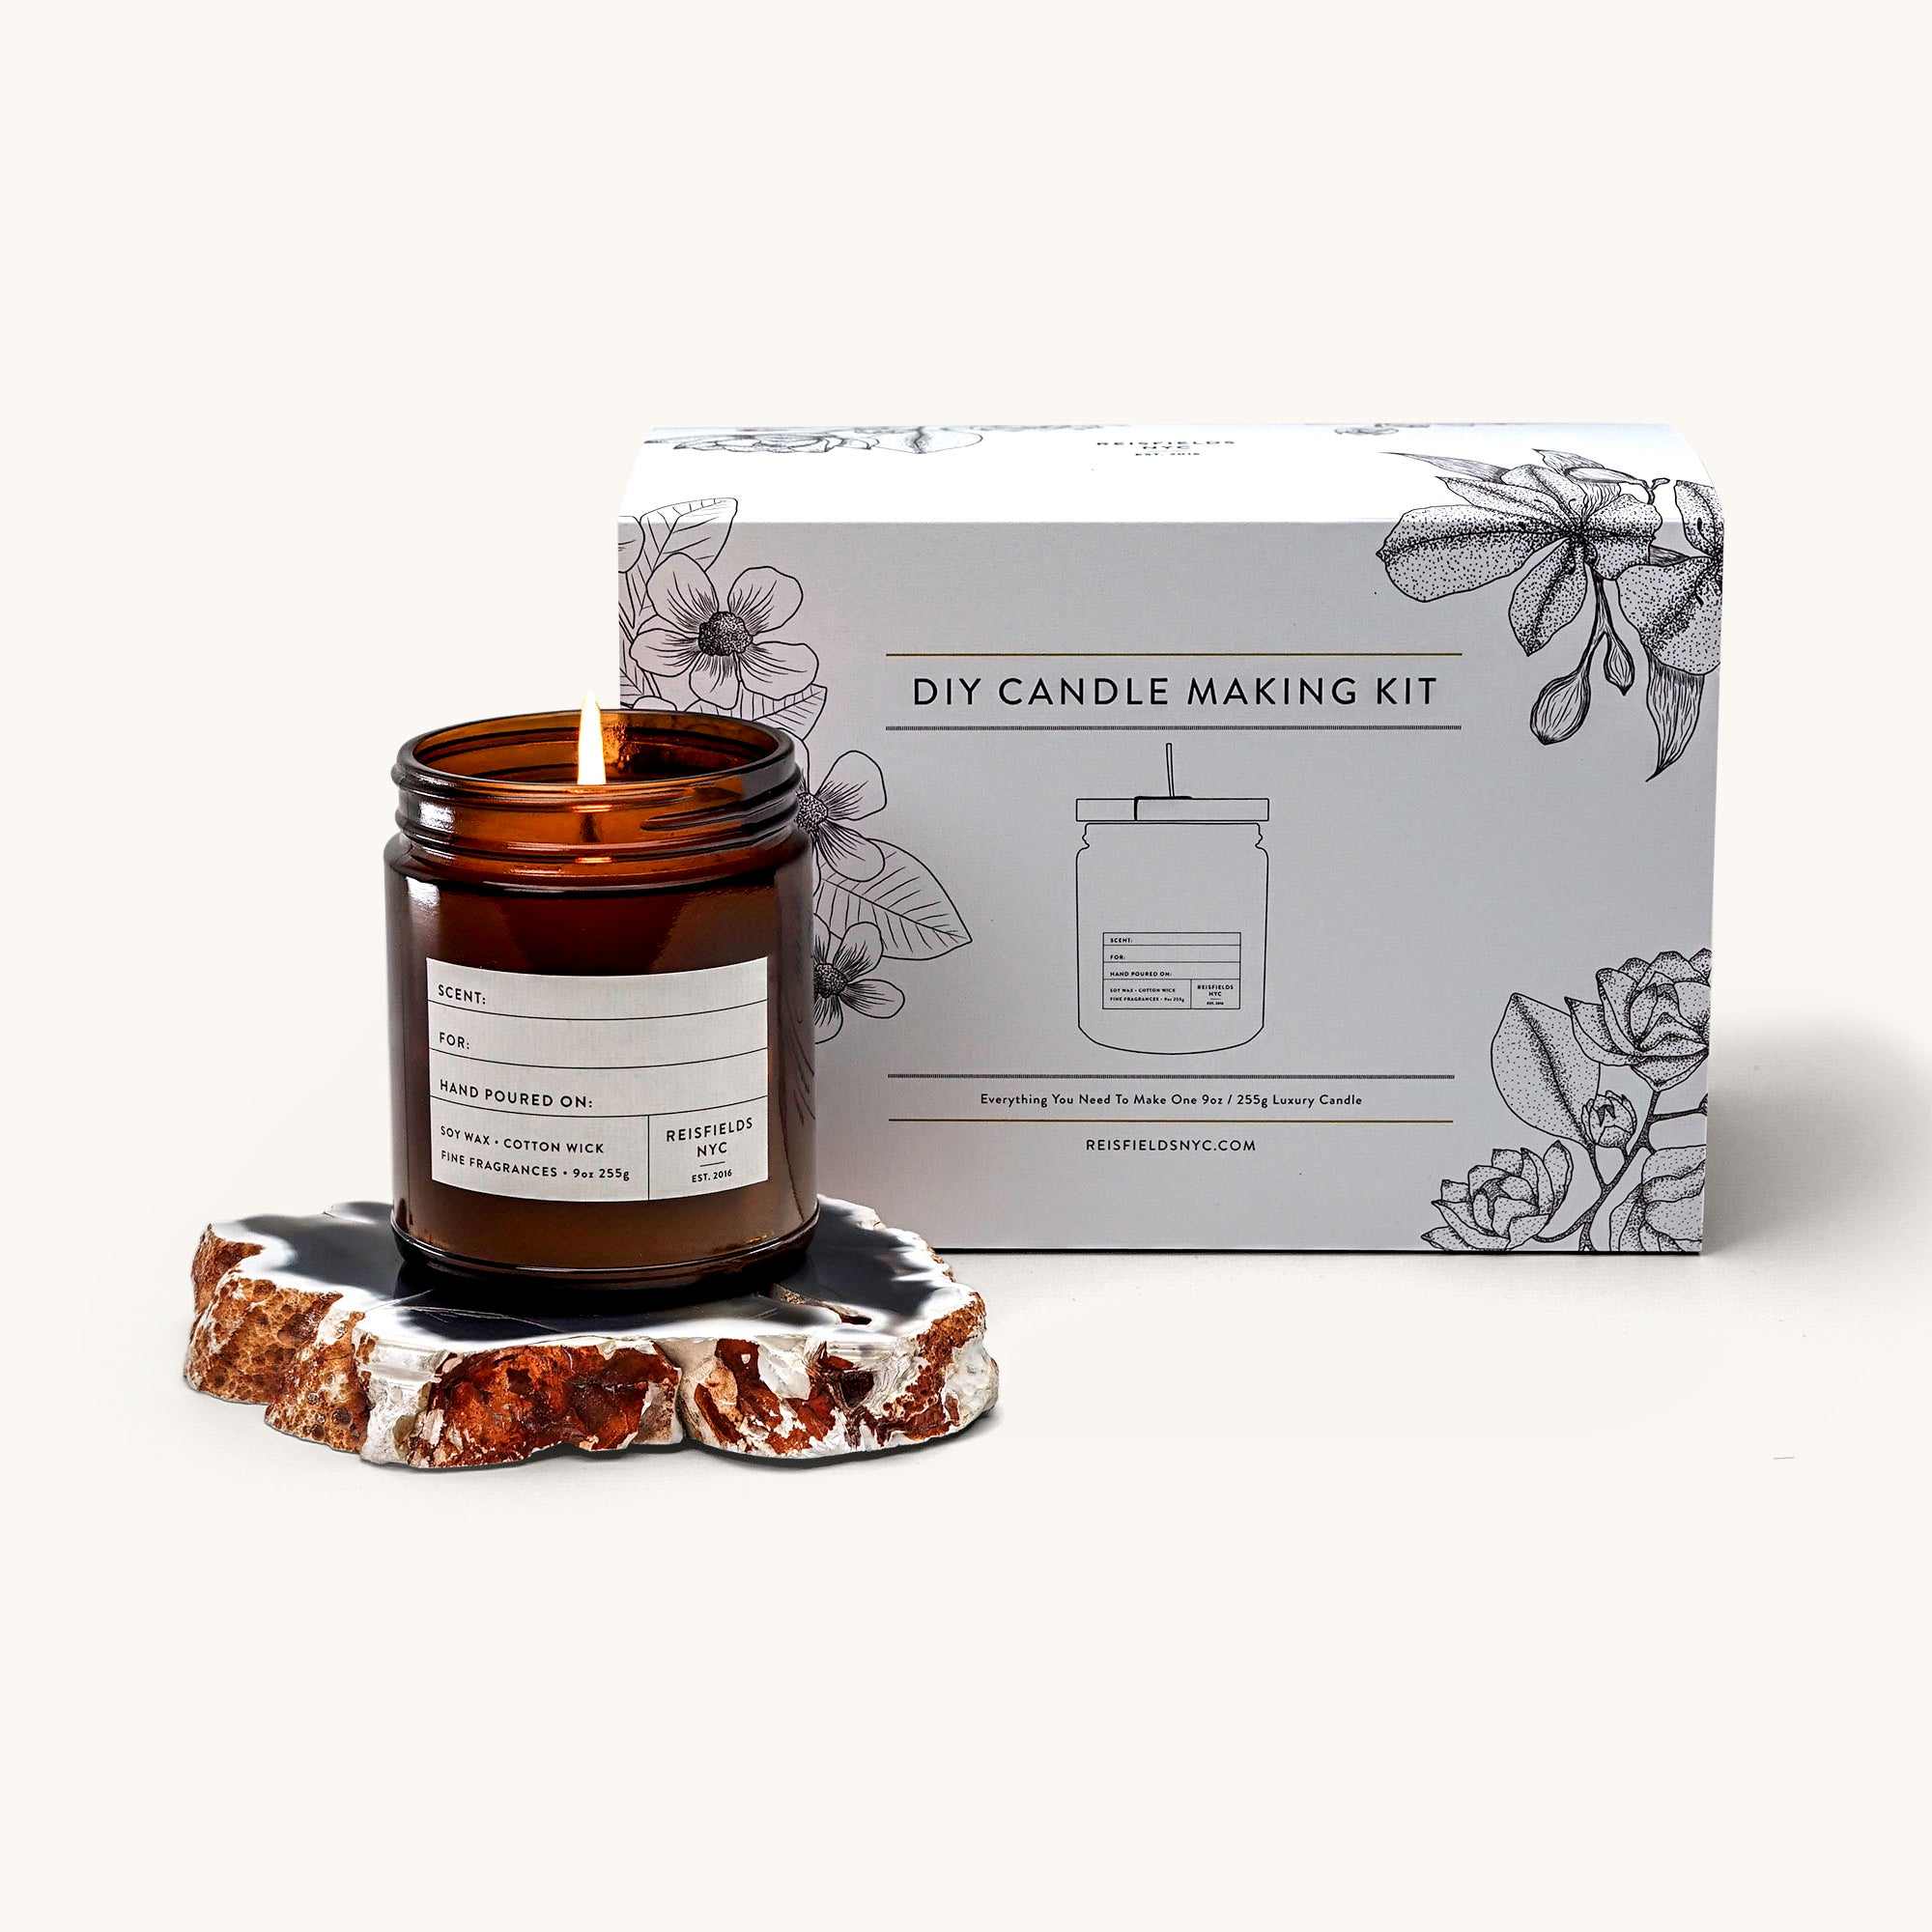 REISFIELDS DIY Candle Making Kit in Amber-Santal at Nordstrom